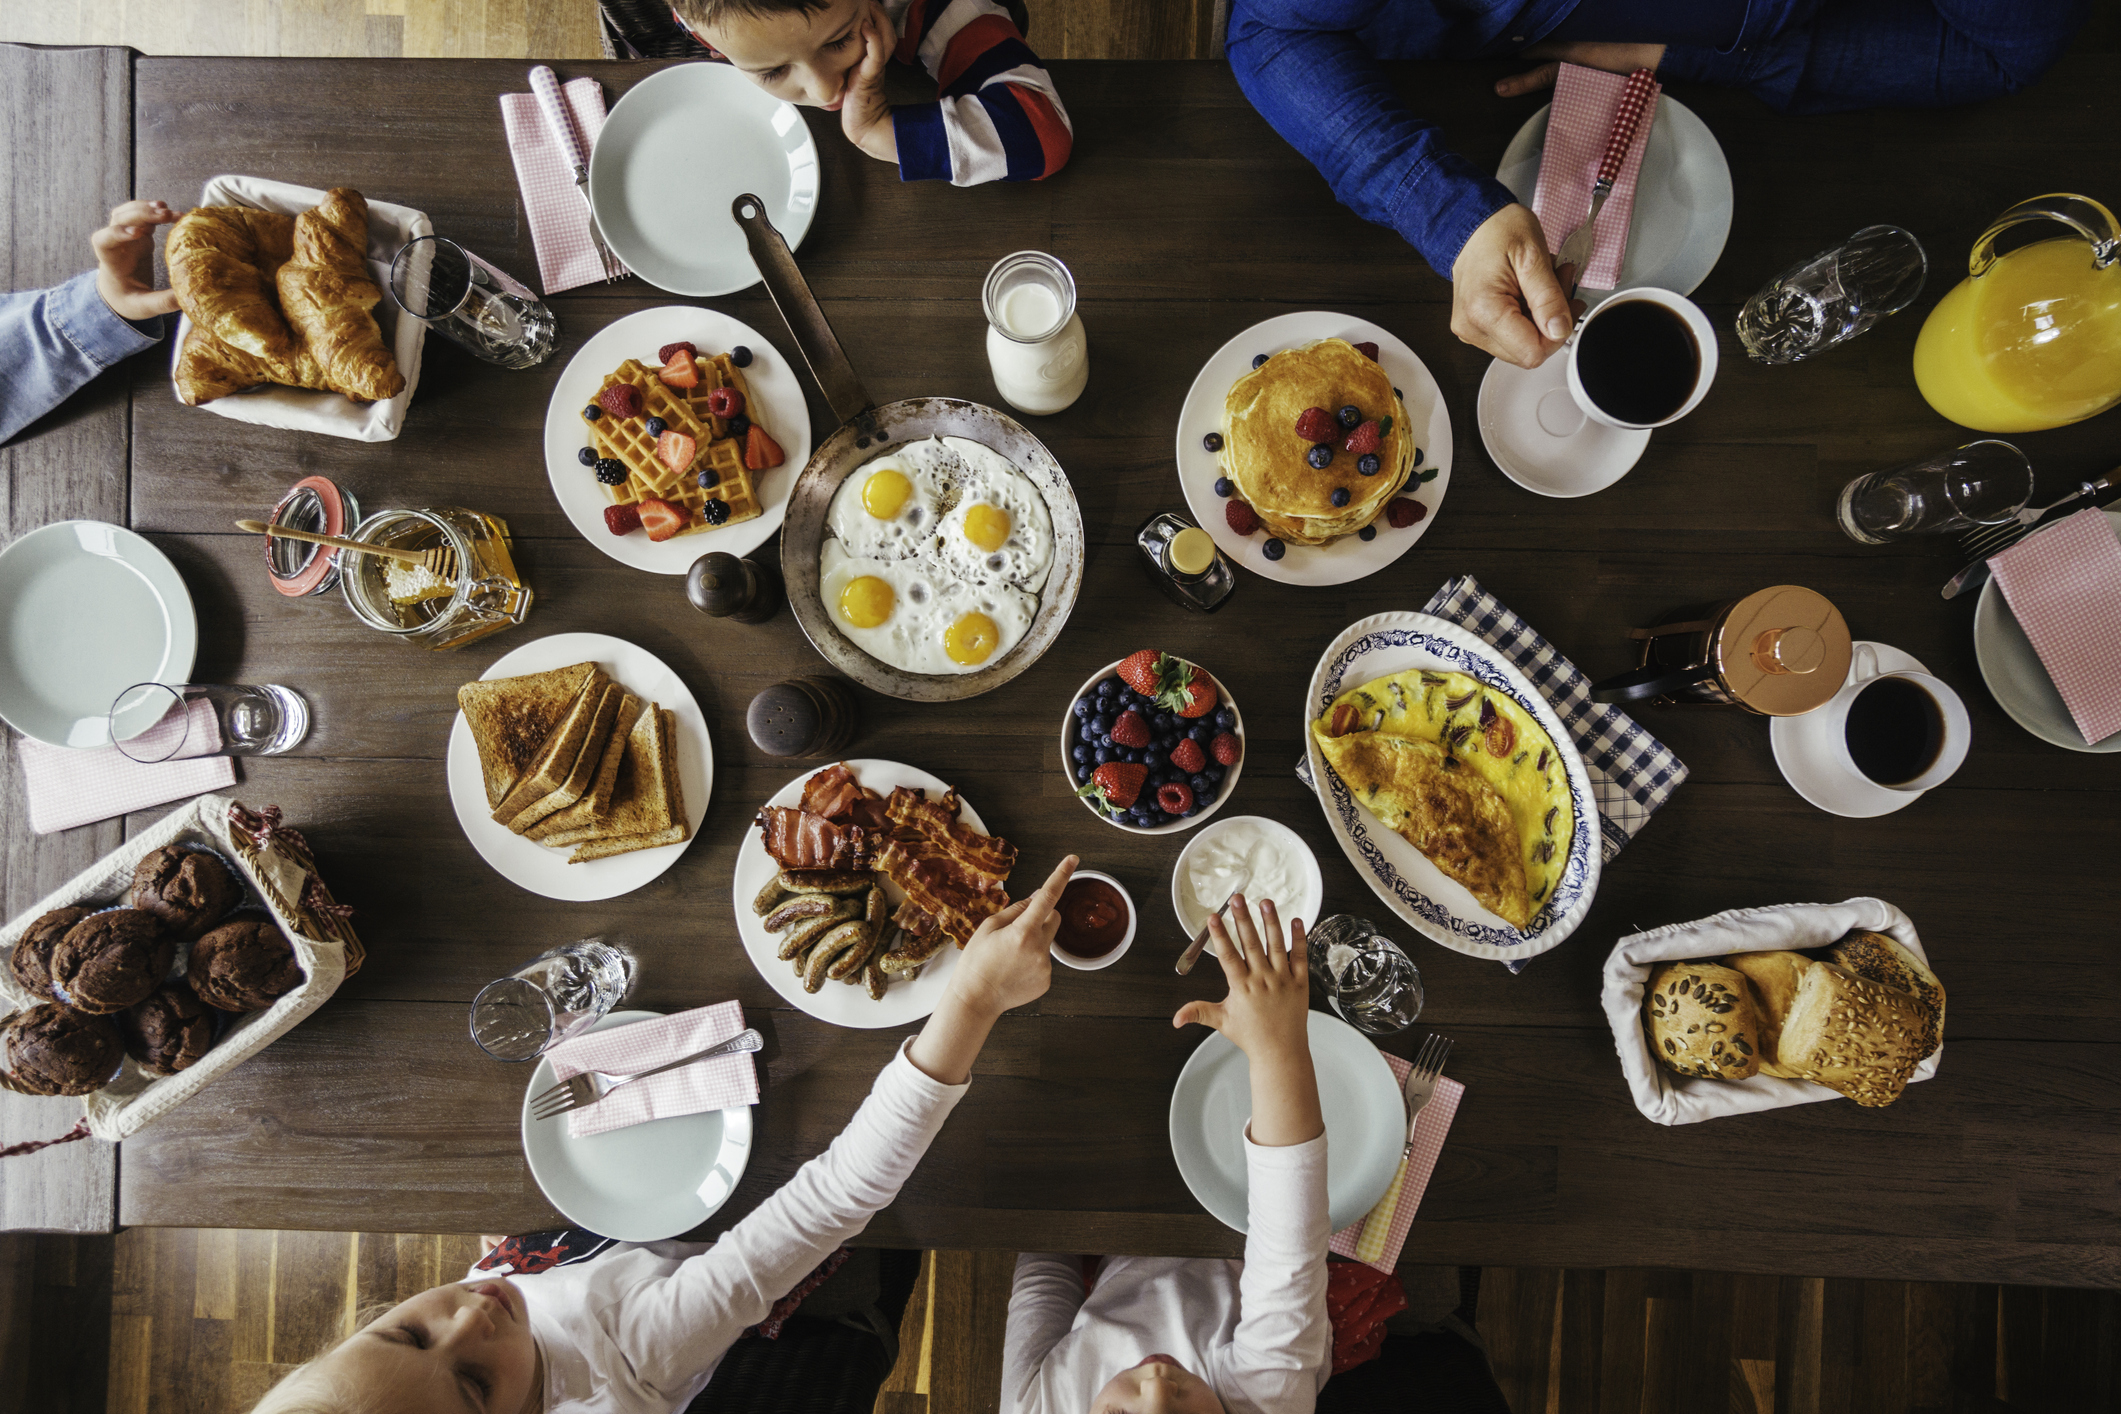 How to Host the Best Brunch Party: Food Ideas, Scheduling, and More